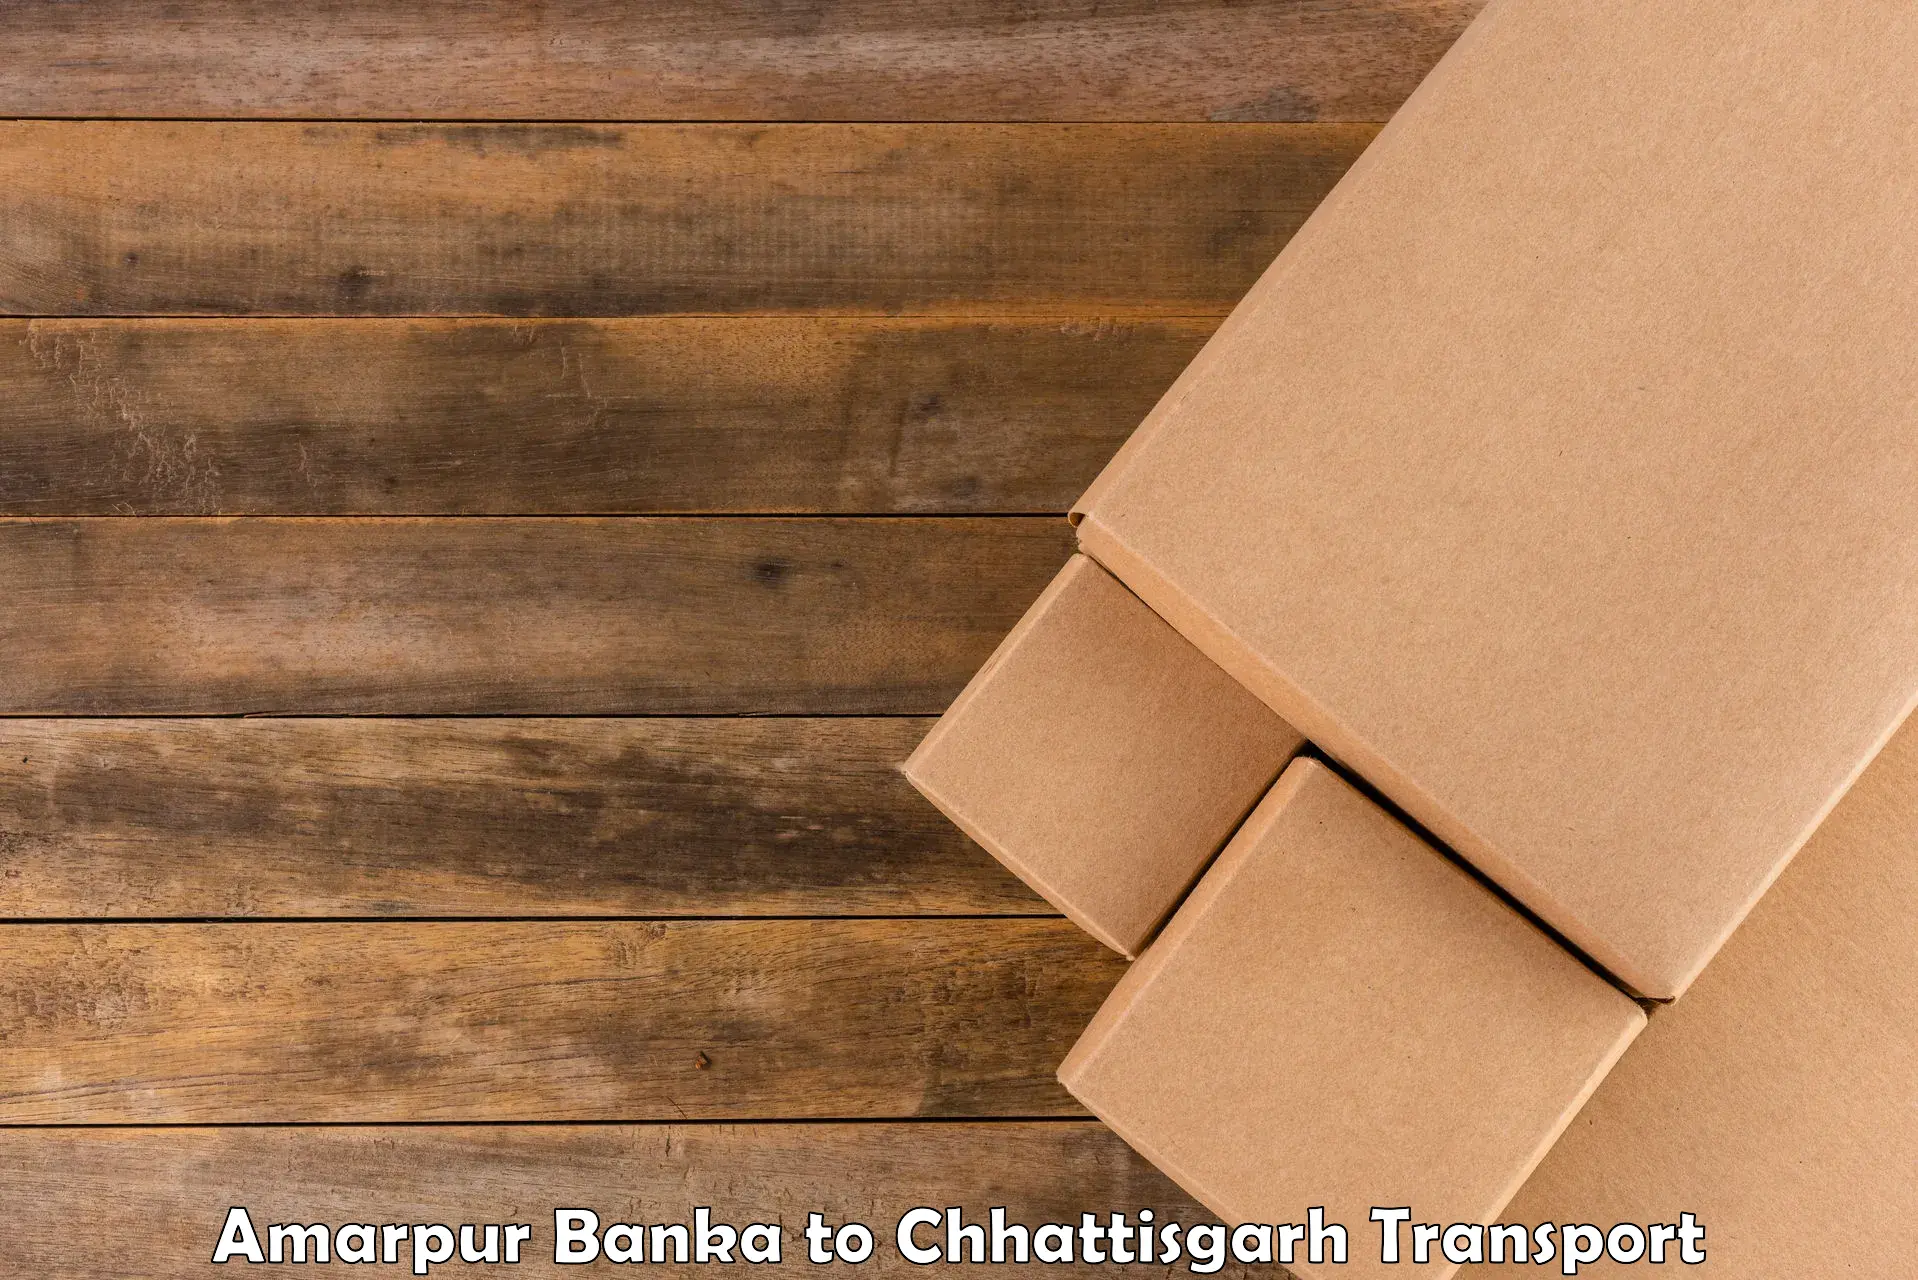 Package delivery services Amarpur Banka to Chhattisgarh